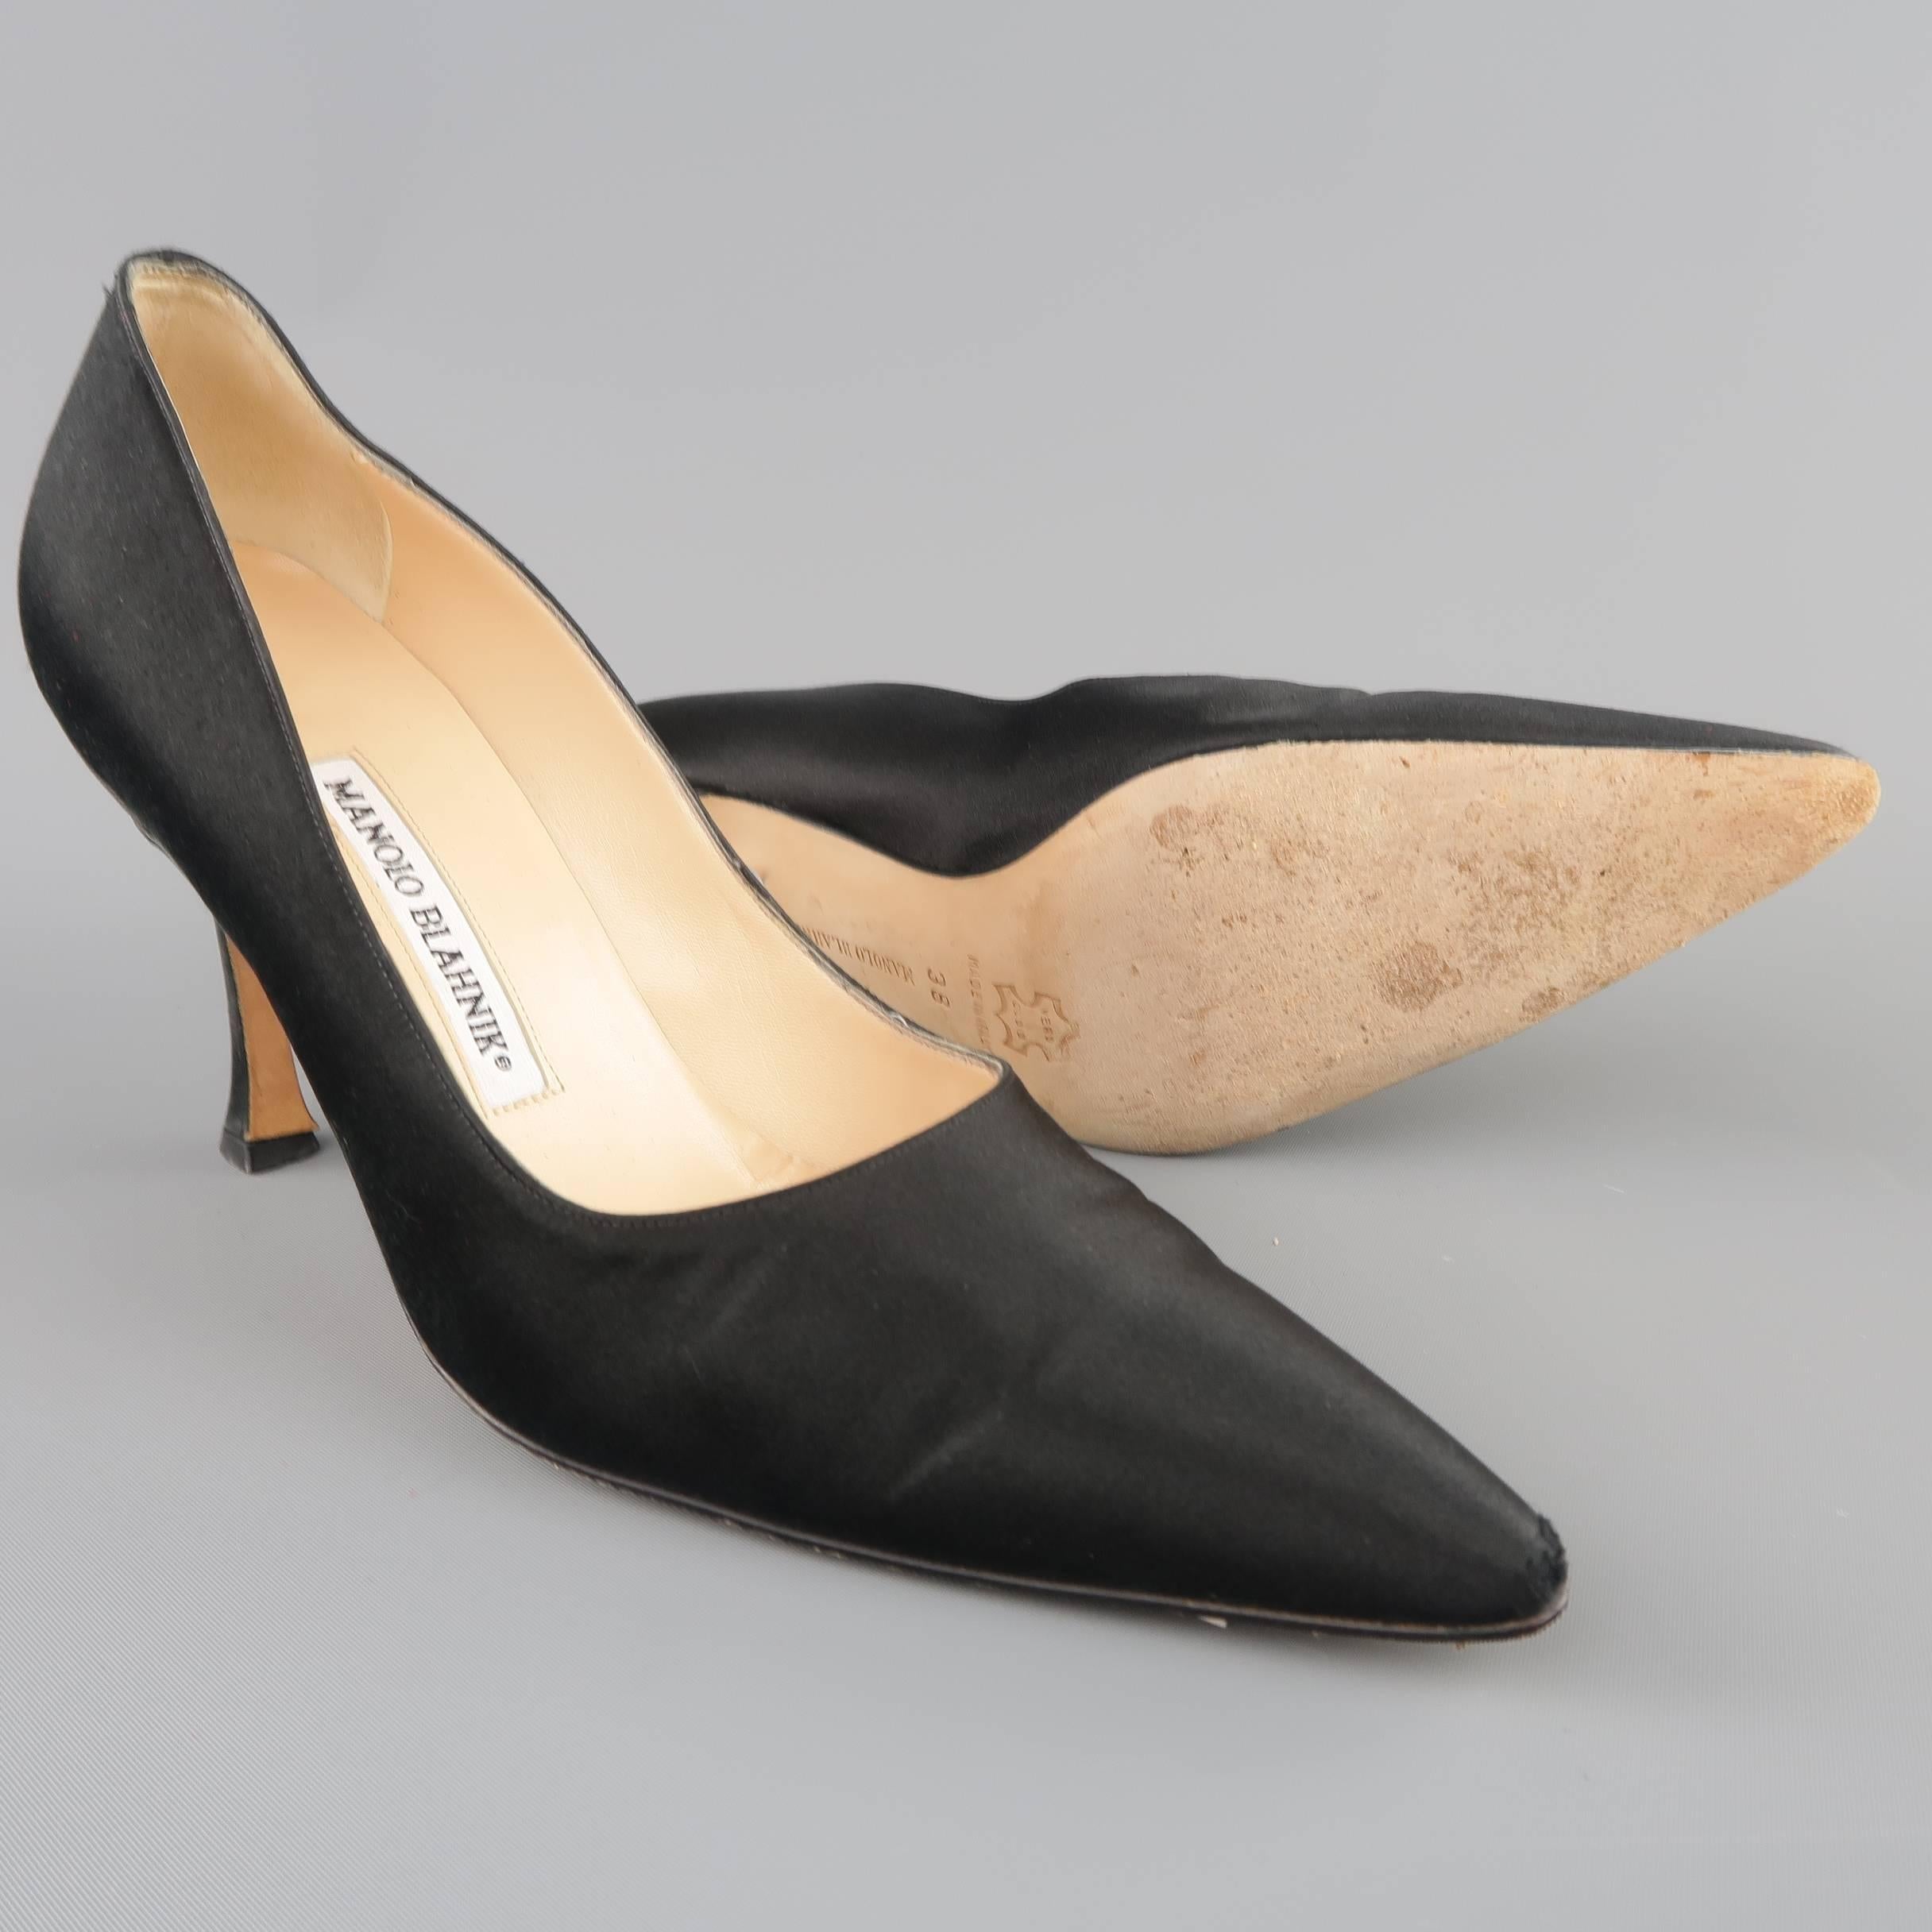 MANOLO BLAHNIK pumps come in black silk satin and feature a pointed toe and covered stiletto heel. Wear on toe. As-Is. With Box. Made in Italy.
 
Good Pre-Owned Condition.
Marked: IT 38
 
Heel: 3.5 in.


SKU: 80056